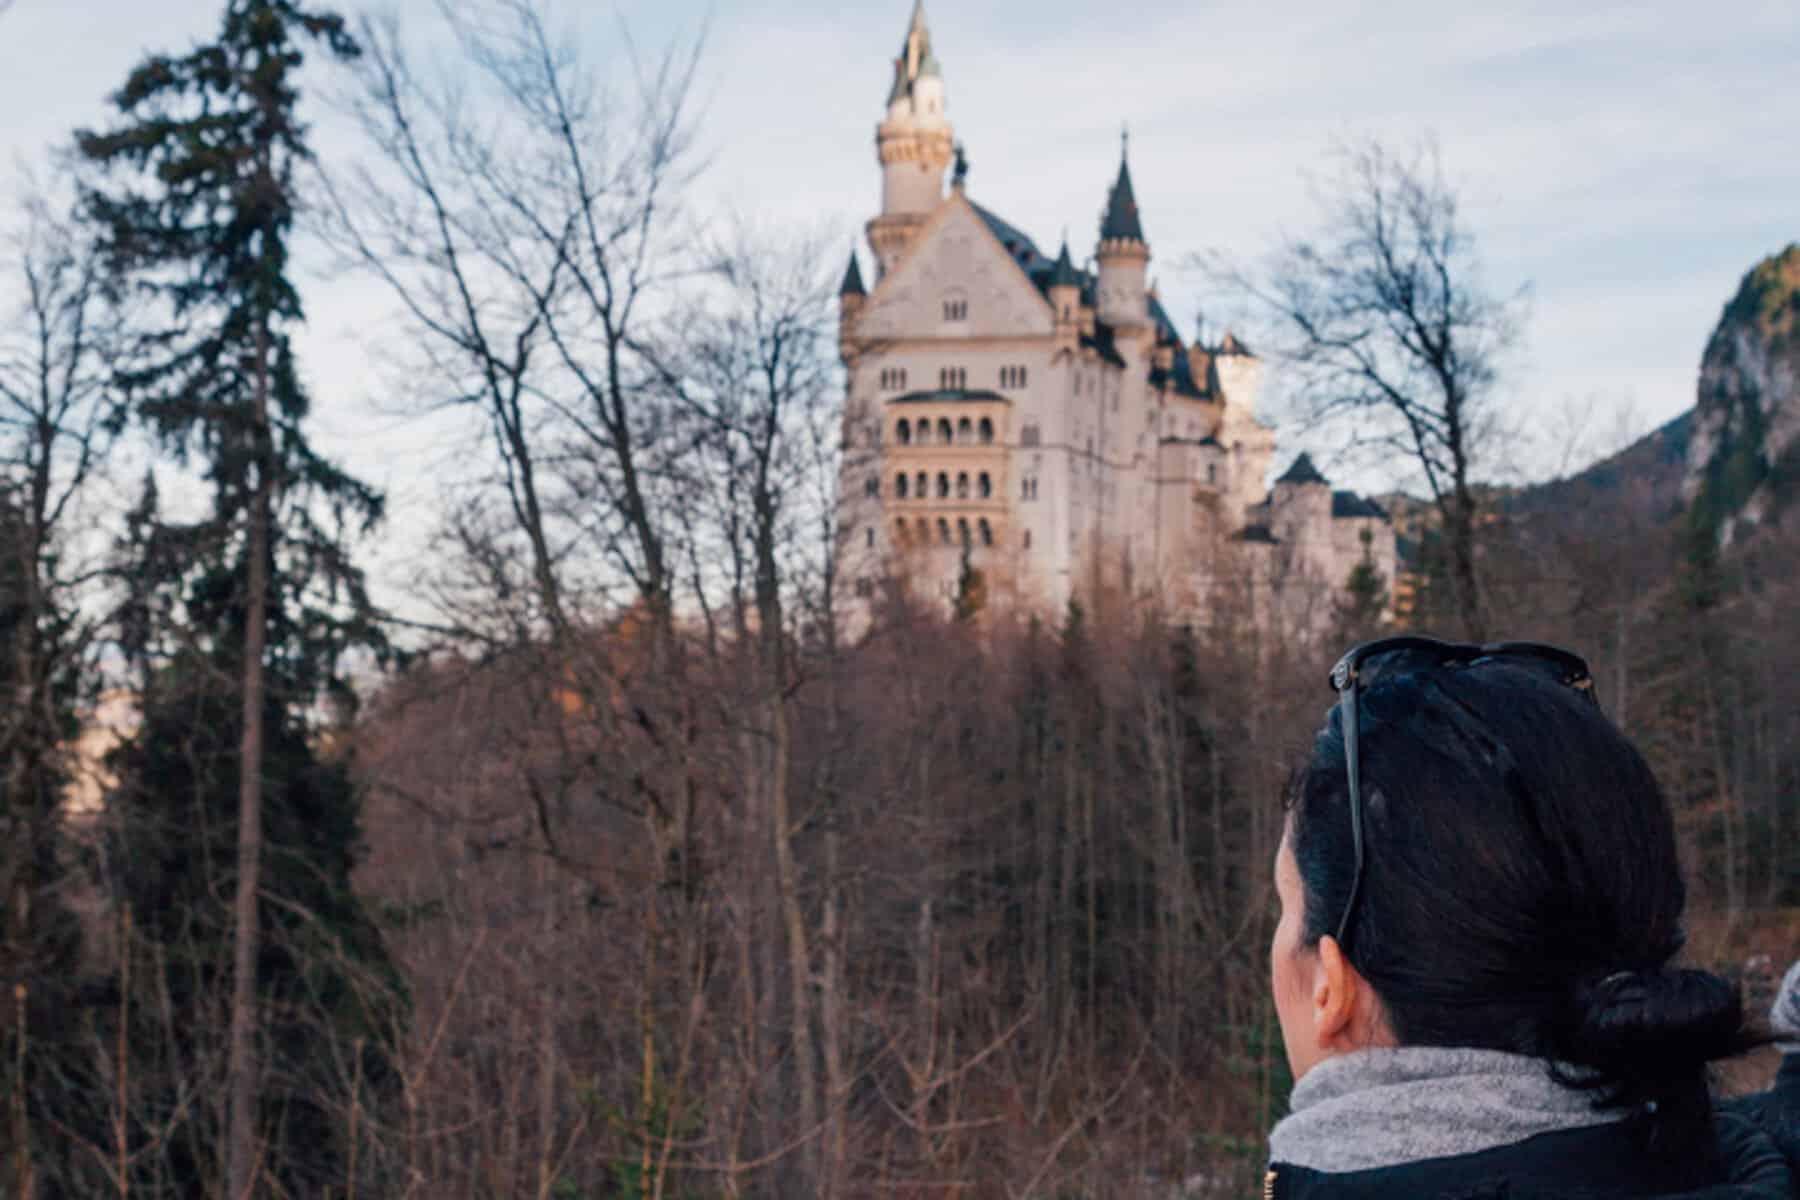 Lucia is facing the castle looking up through the forest to the castle on the hill. She has dark hair tied in a bun and is wearing sunglasses on her head.